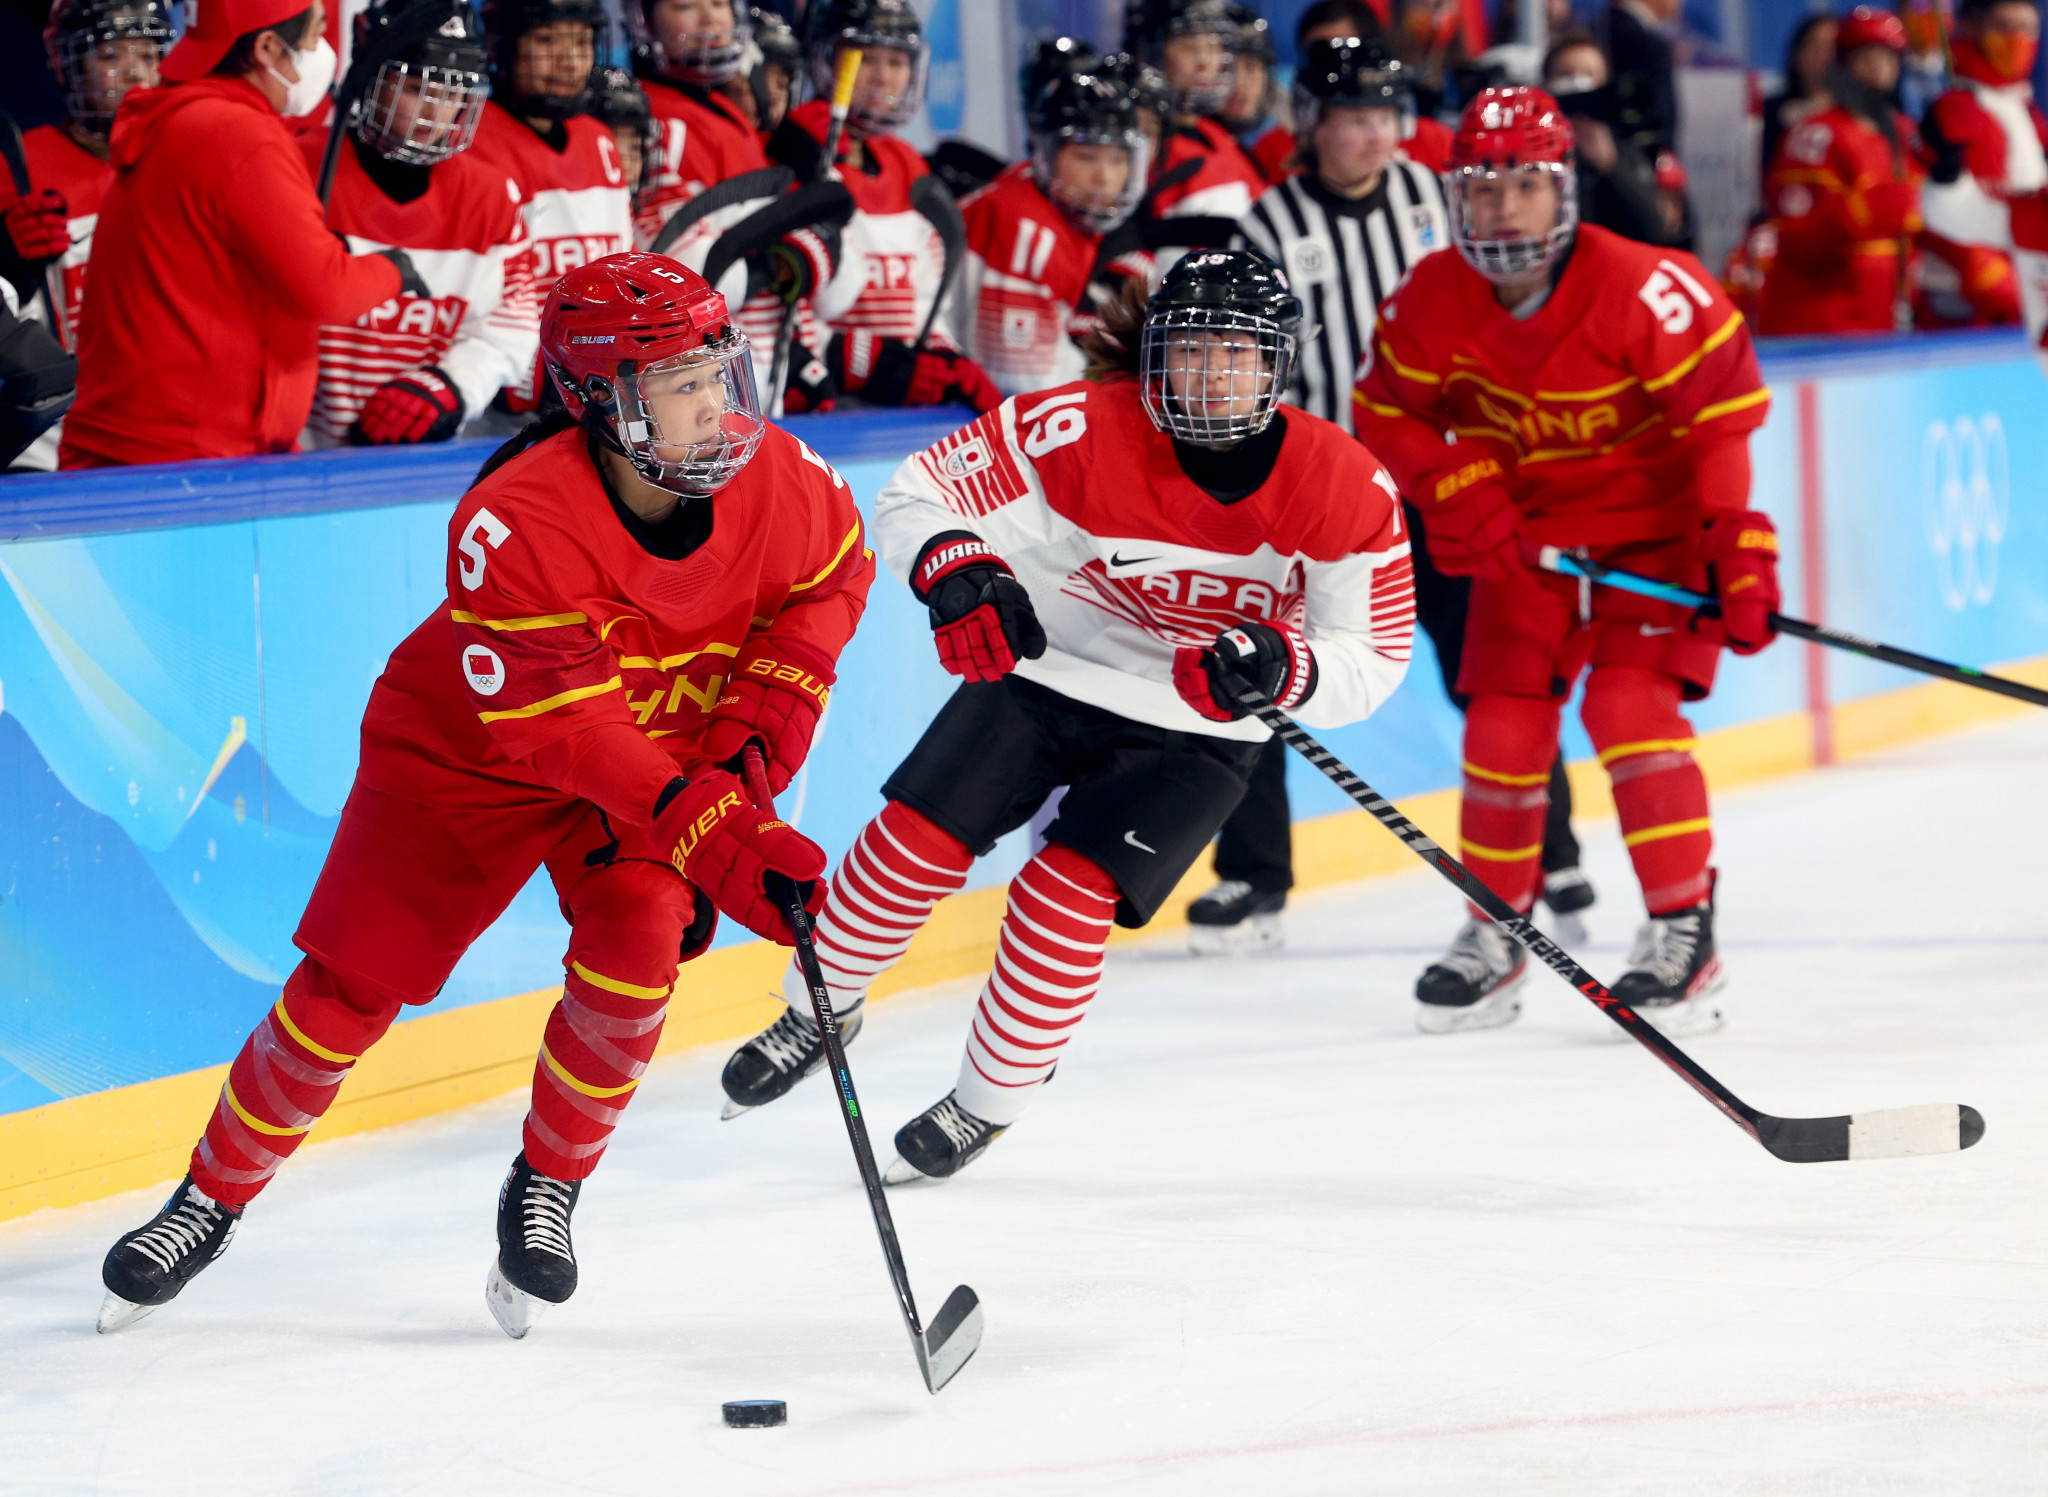 Shenzhen in China is due to stage this year's IIHF Women's World Championship Division I Group A but it has now been delayed due to COVID-19 restrictions ©Getty Images